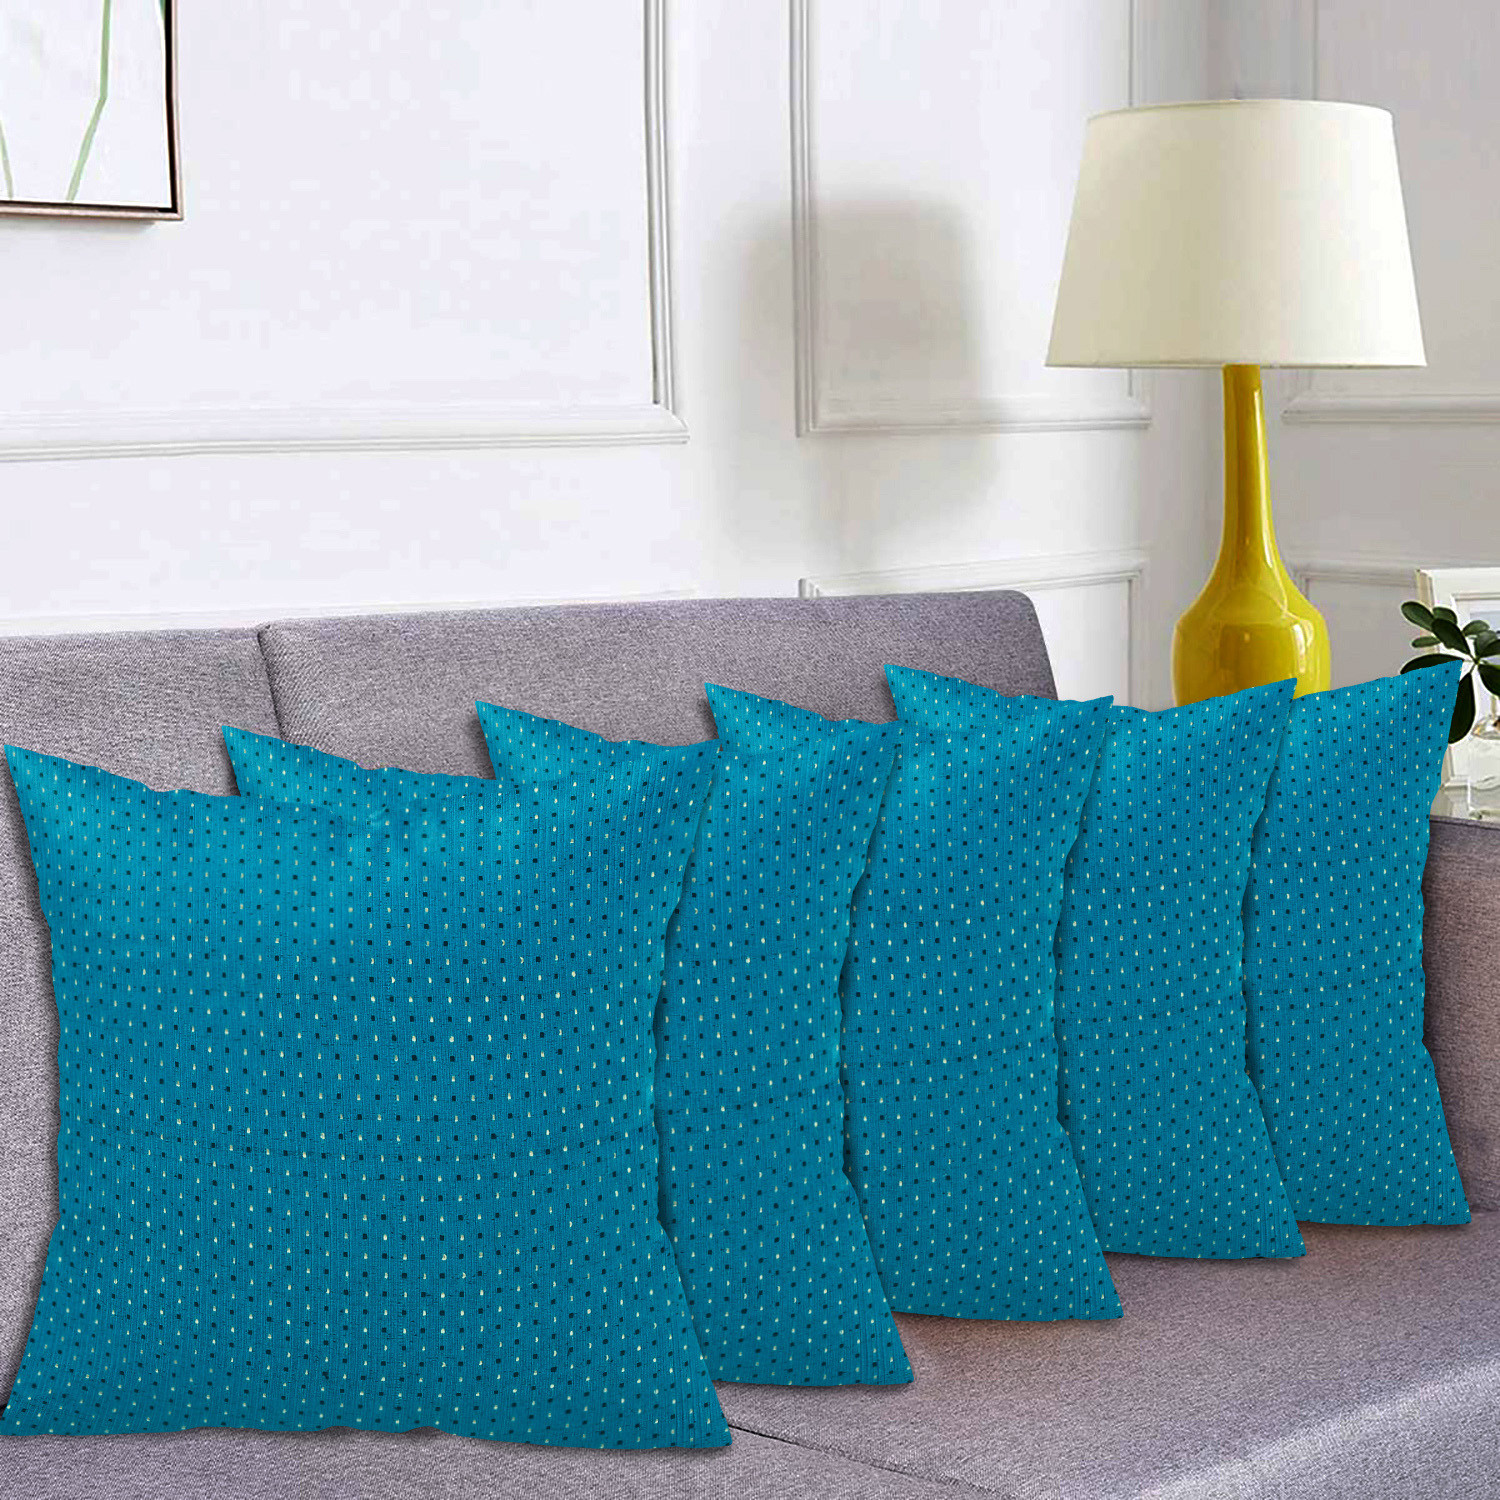 Kuber Industries Dot Print Soft Decorative Square Cushion Cover, Cushion Case For Sofa Couch Bed 16x16 Inch-(Blue)